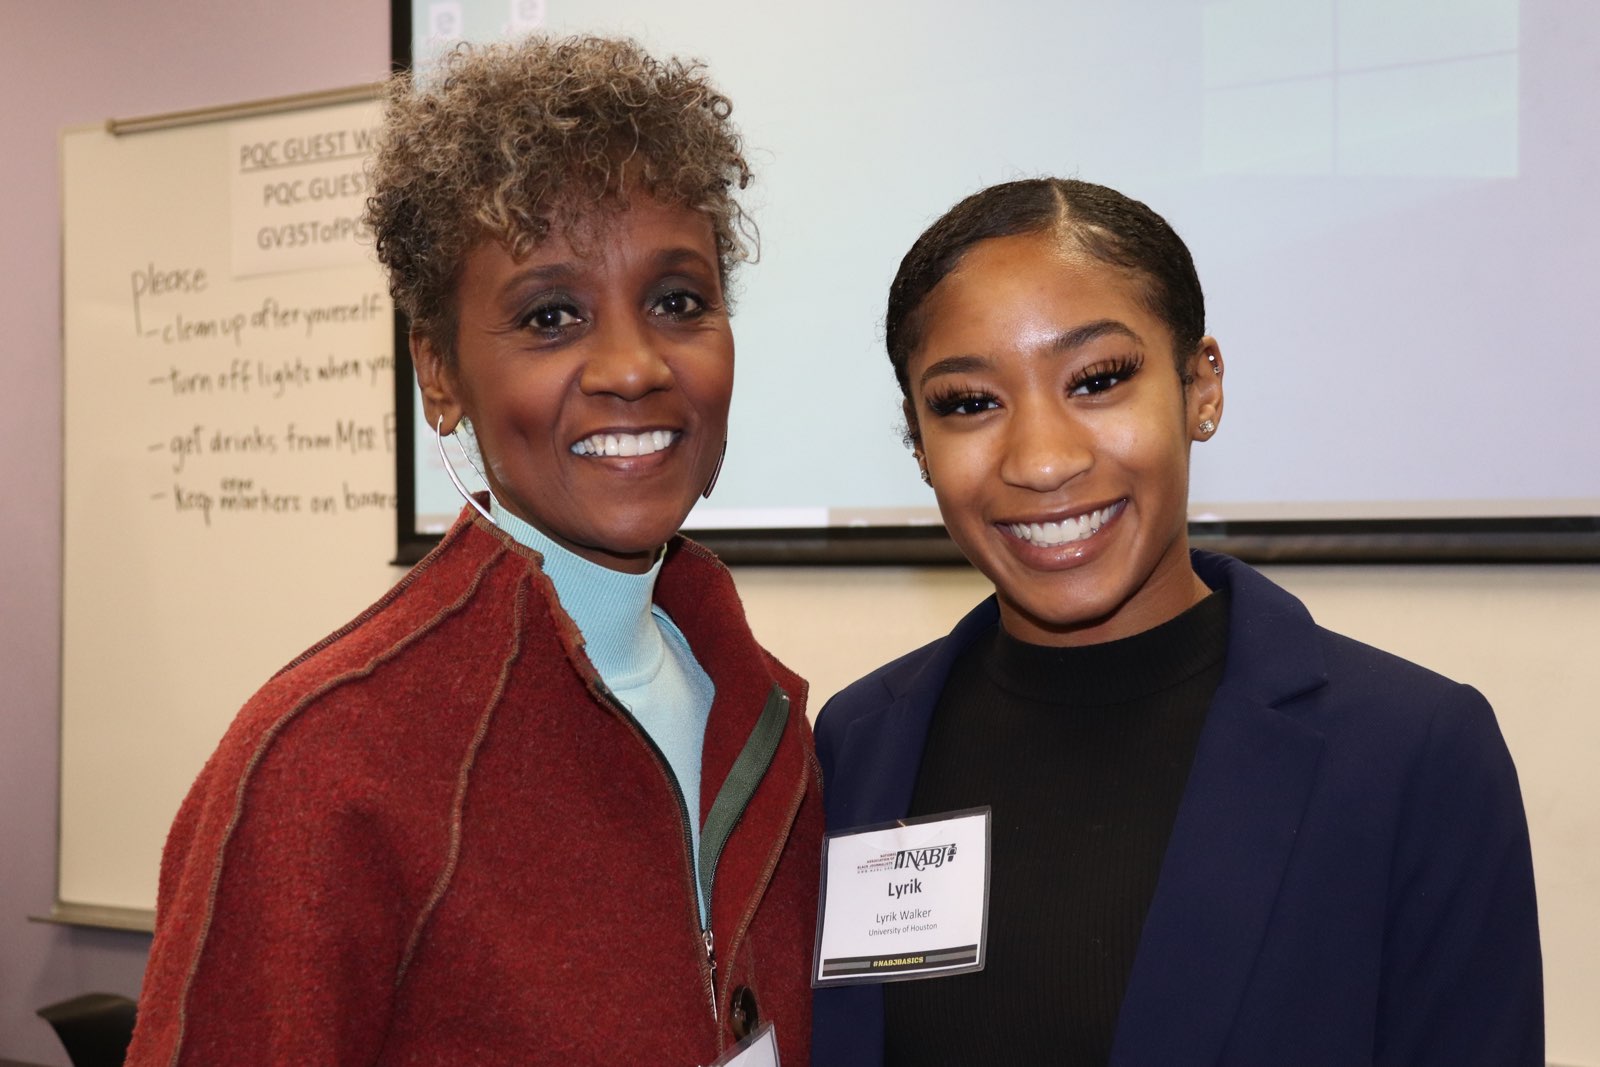 Picture of Lyrik Walker with a speaker at the NABJ bootcamp conference.